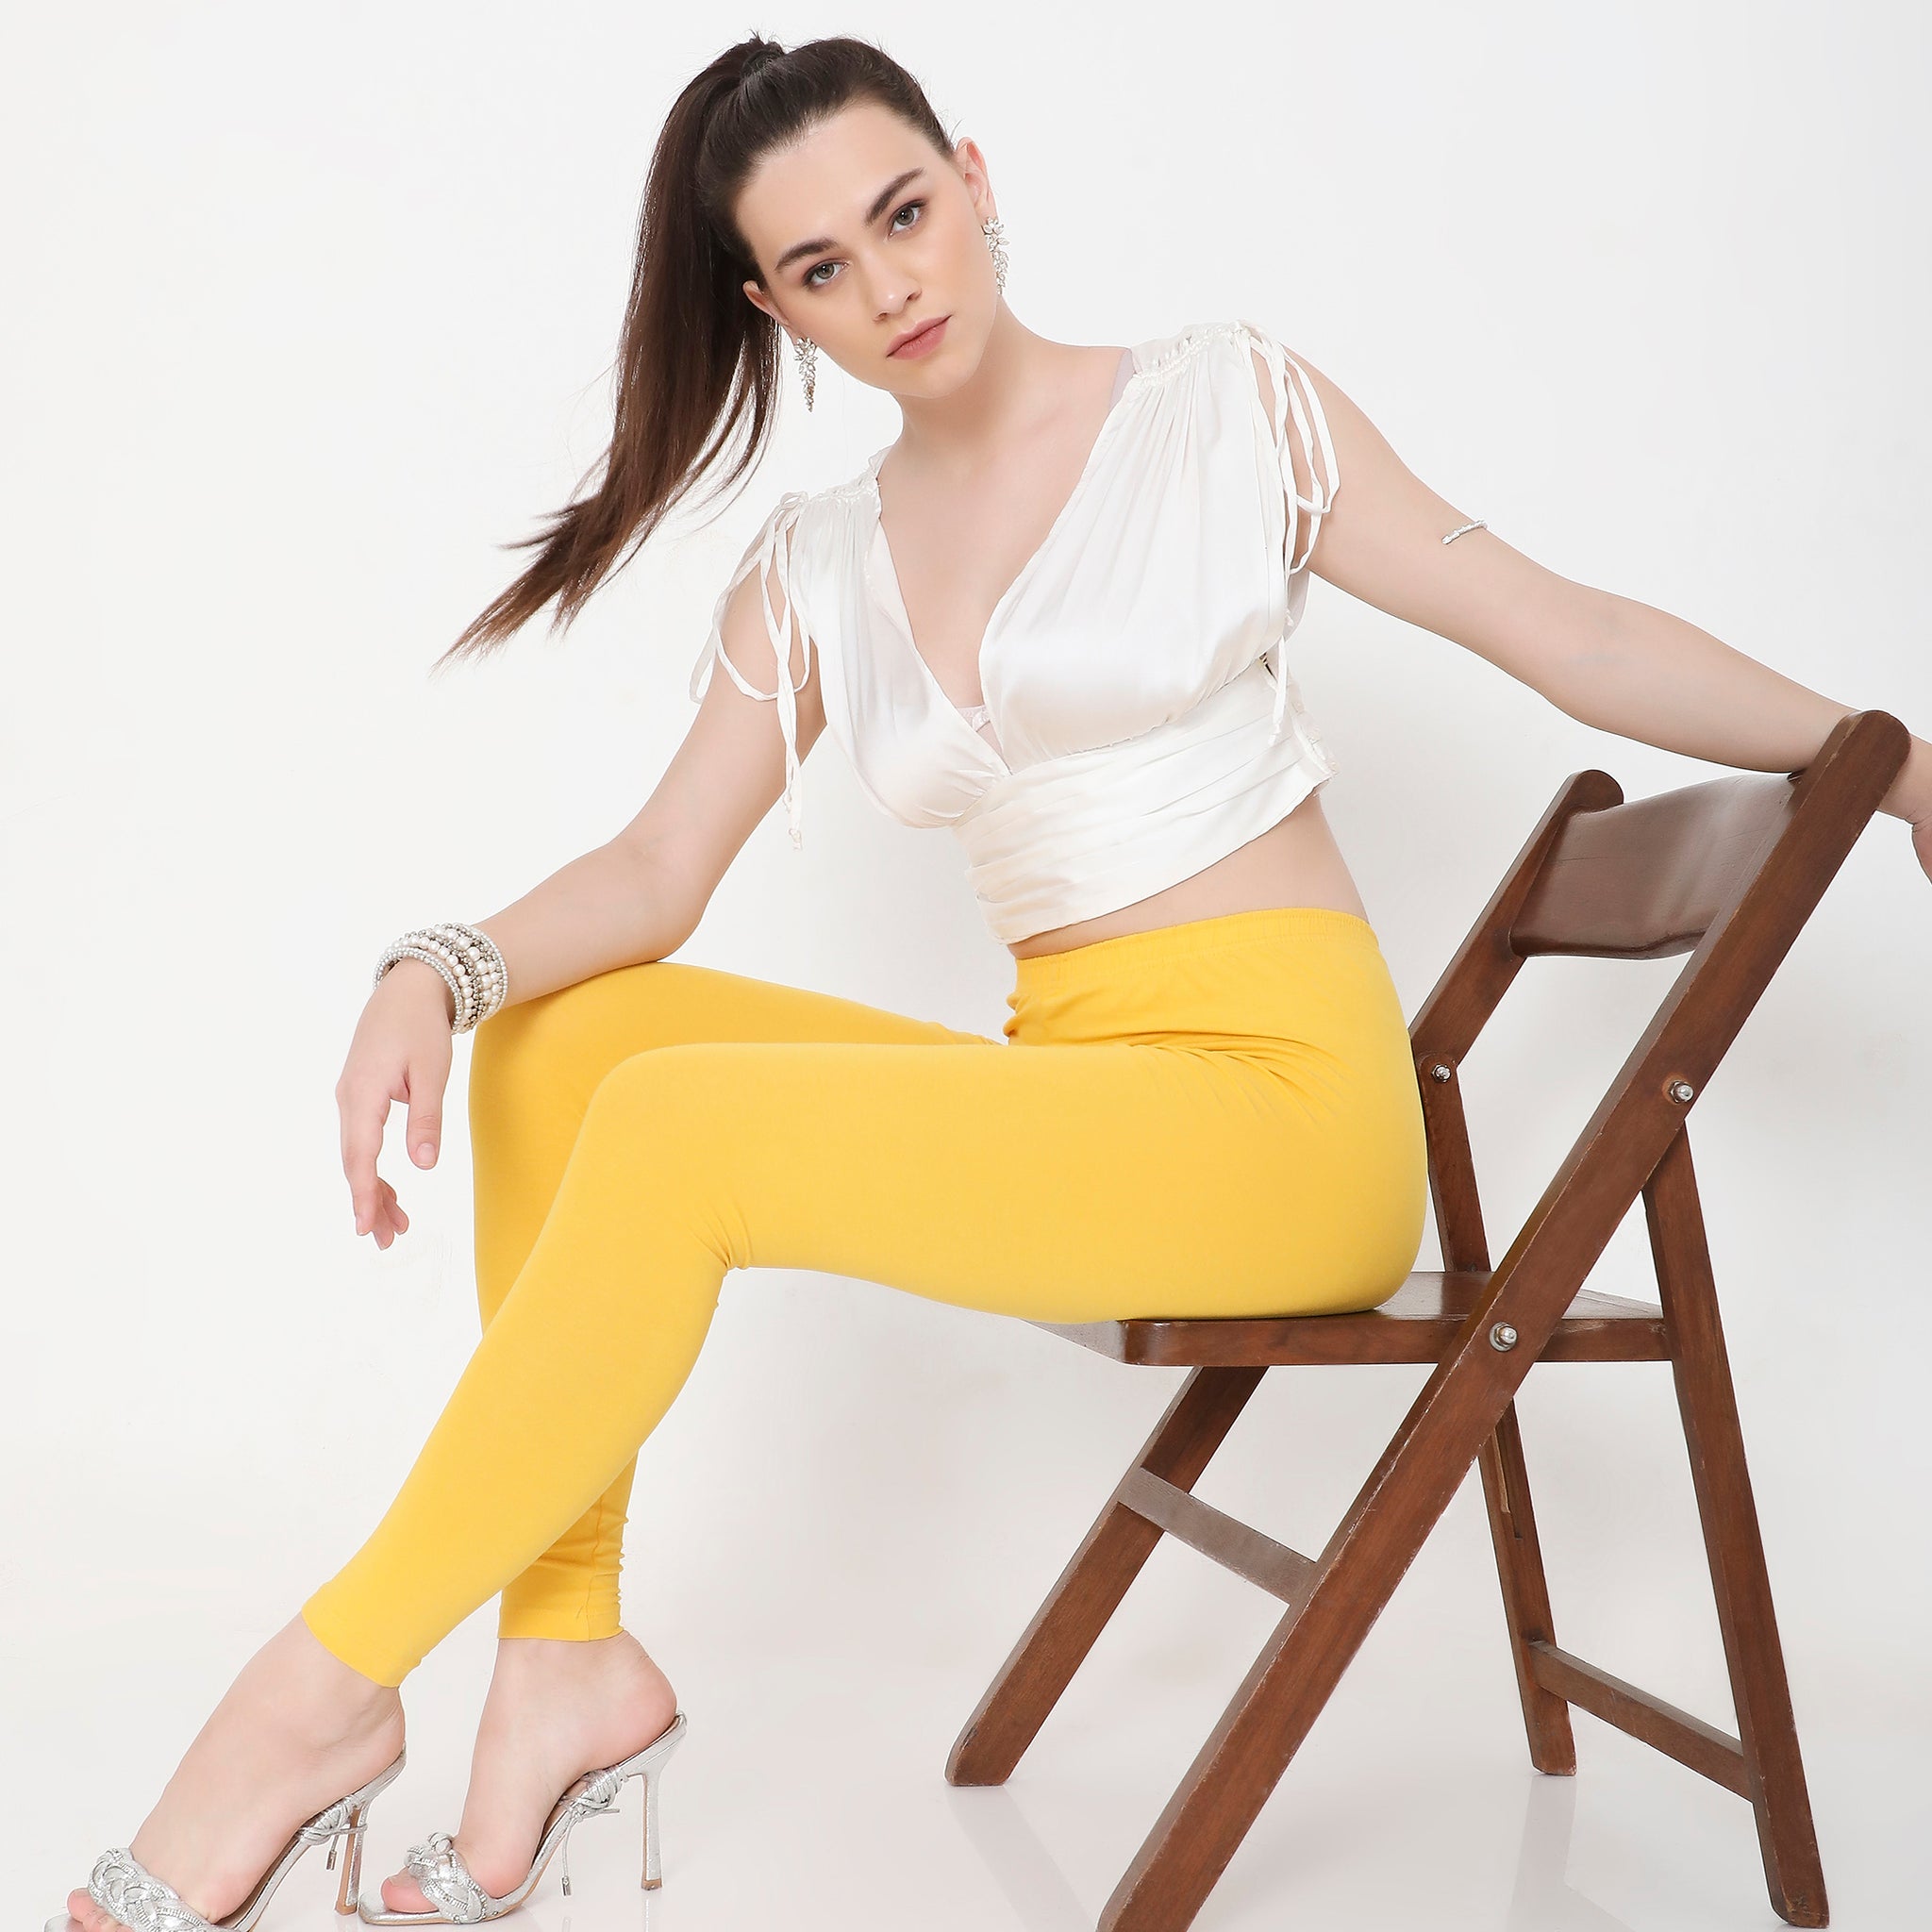 WOMEN SOLID YELLOW ANKLE-LENGTH COTTON LEGGINGS